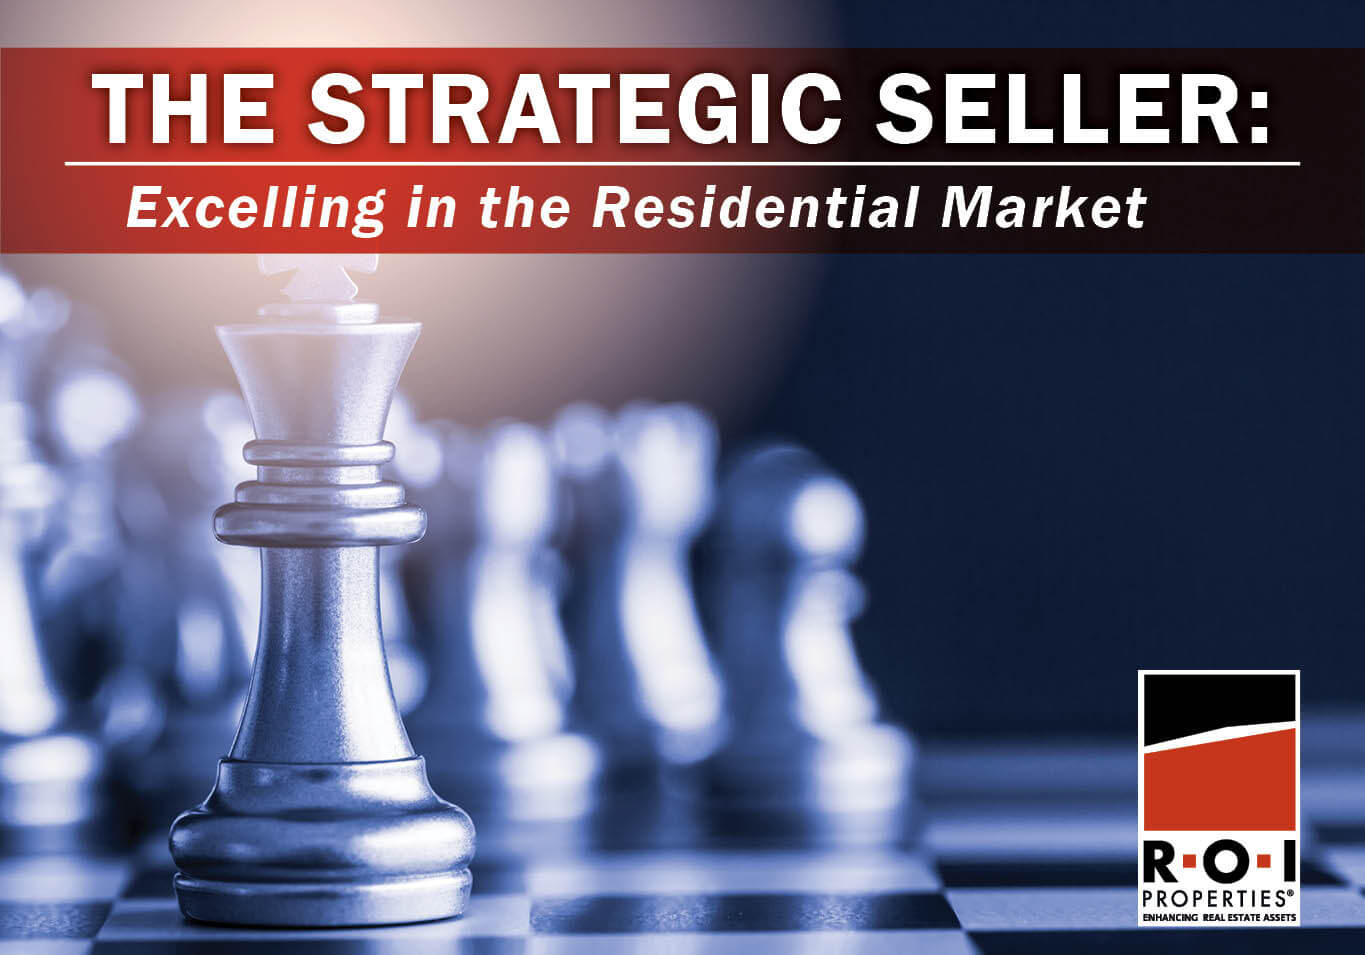 A Game of Chess with the King advancing and text that reads "The Strategic Seller: Excelling in the Residential Market